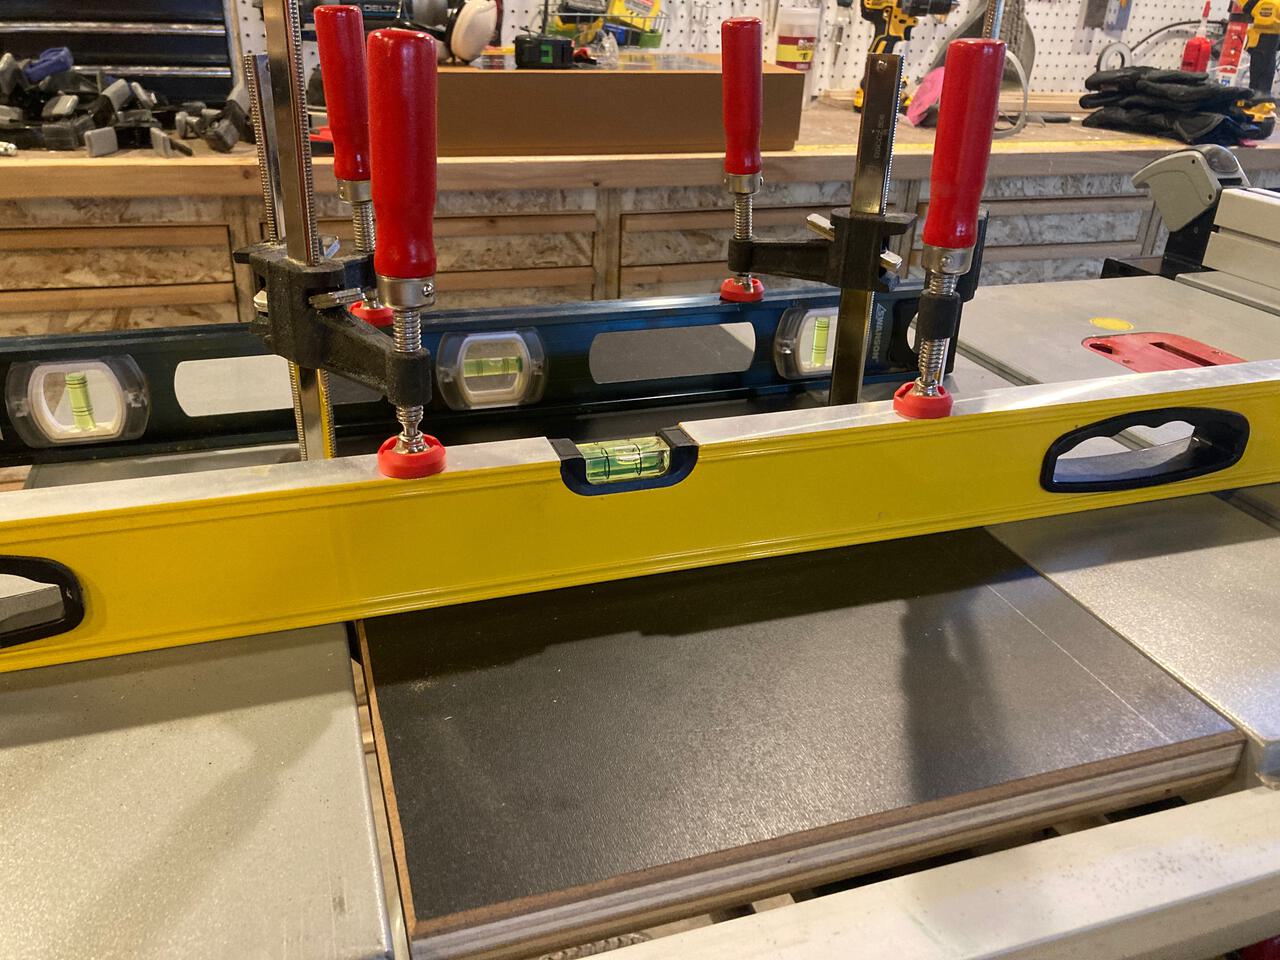 Mounting the router table